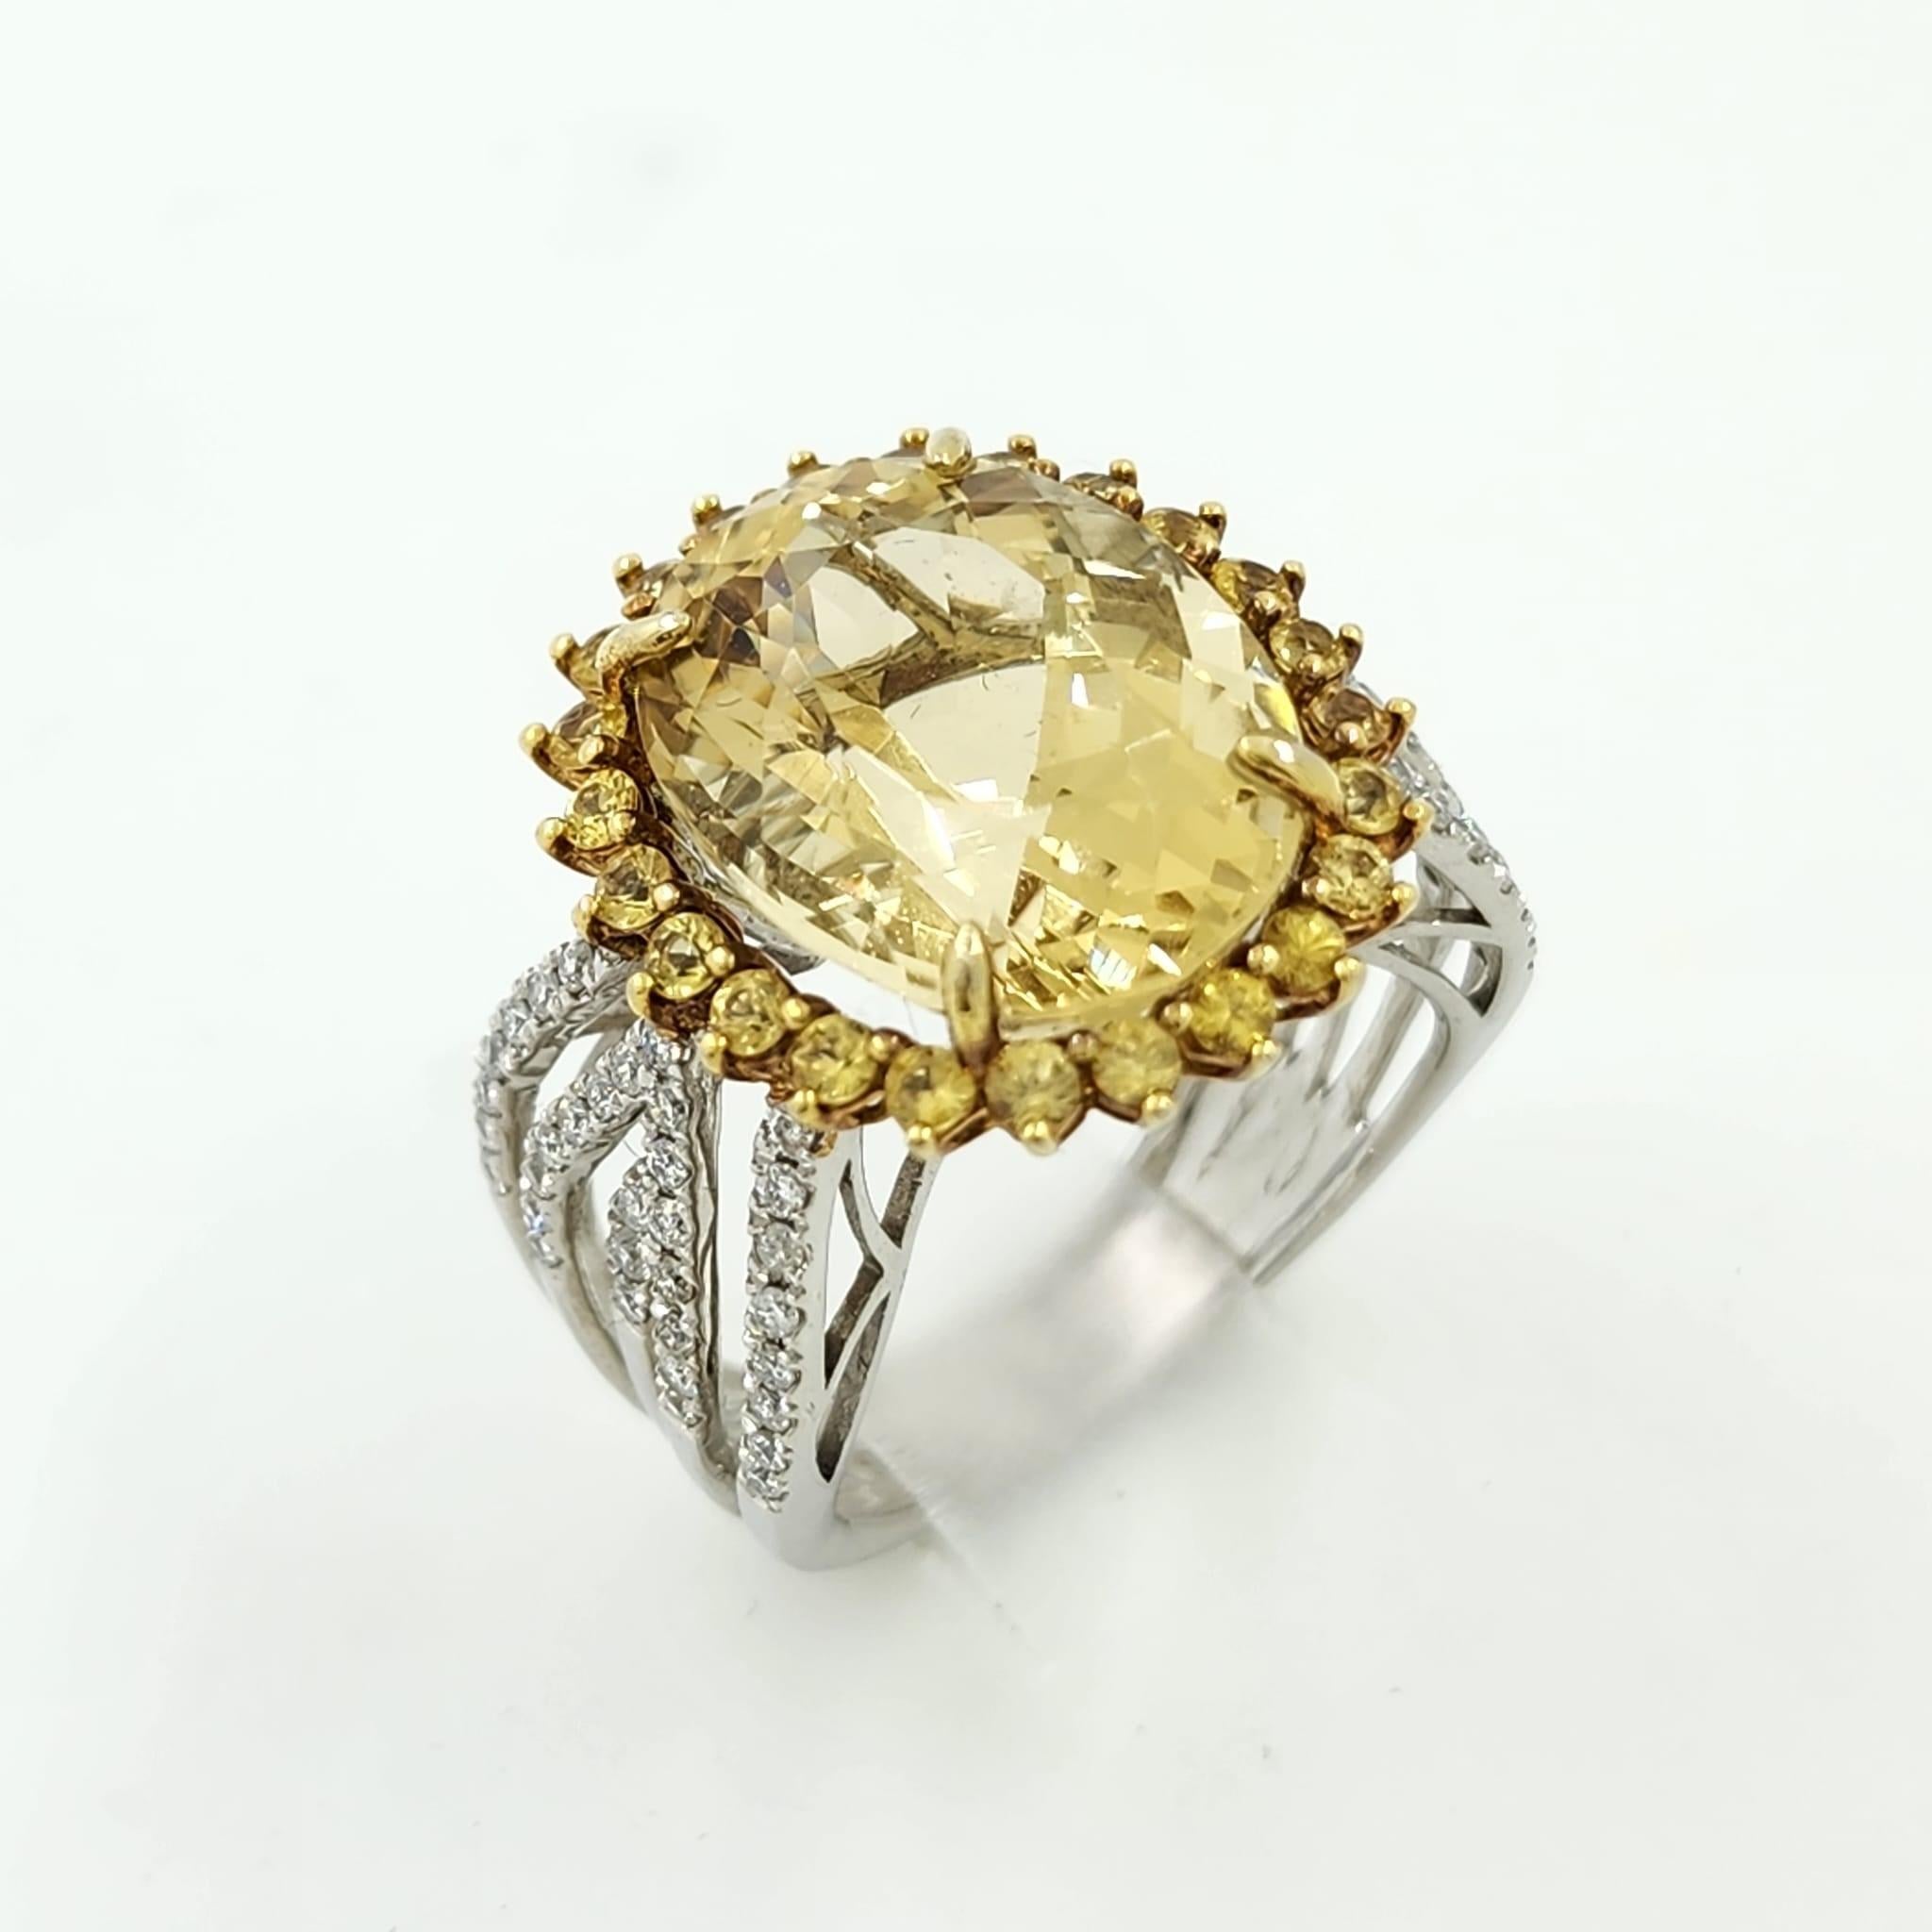 Contemporary Vintage 9.55Ct Yellow Beryl Yellow Sapphire Diamond Ring in 14 Karat White Gold For Sale